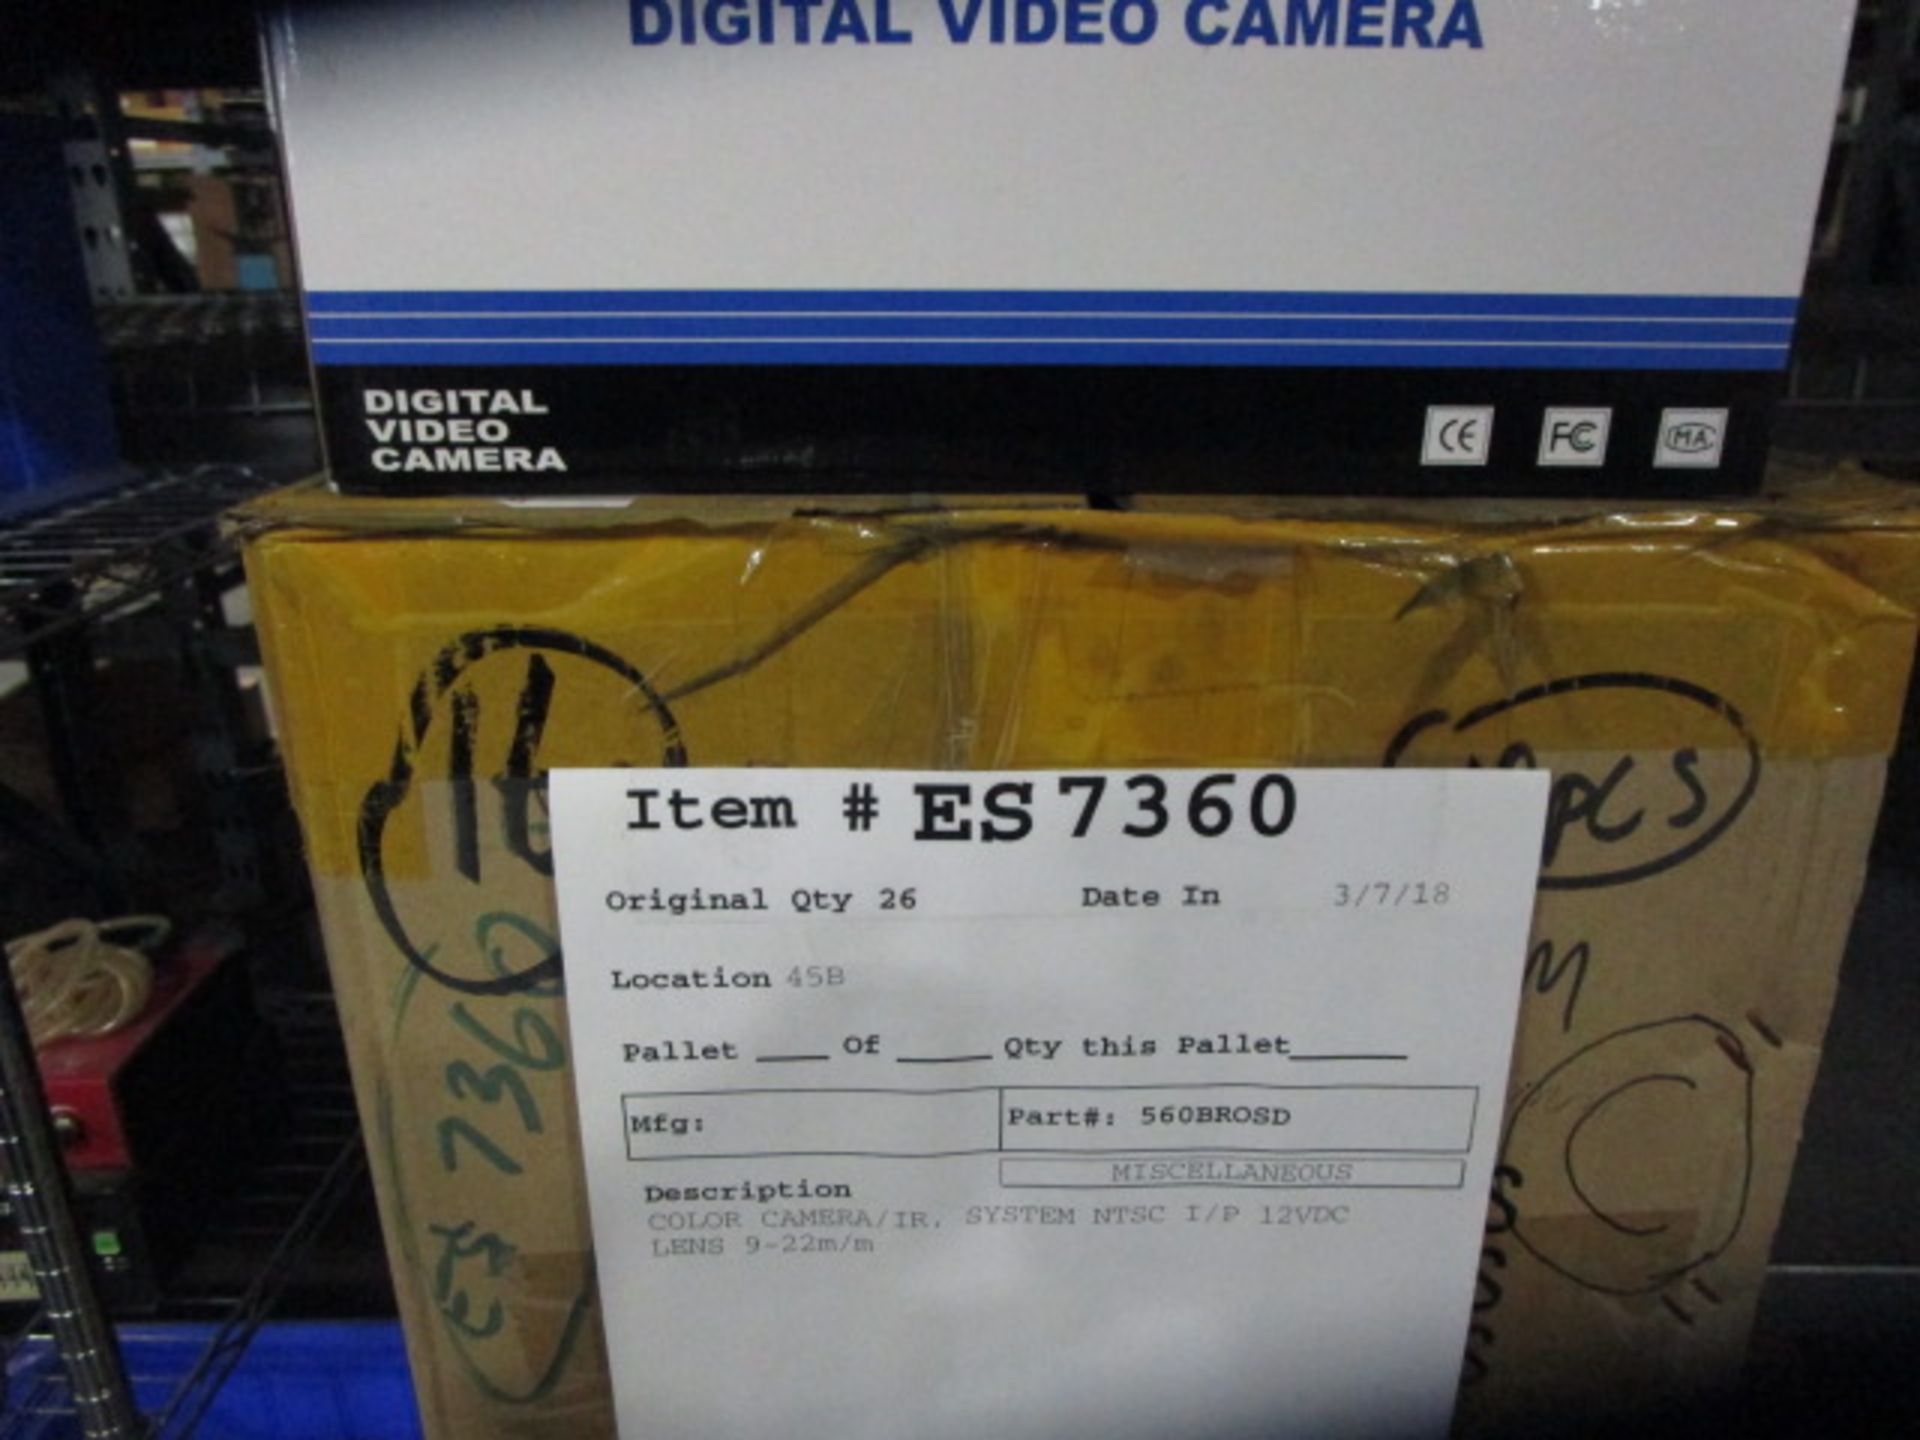 CONTENTS ONLY CONTAINING DIGITAL VIDEO CAMERAS, CABLES, PANEL MOUNTS, POWER ADAPTER - Image 6 of 8